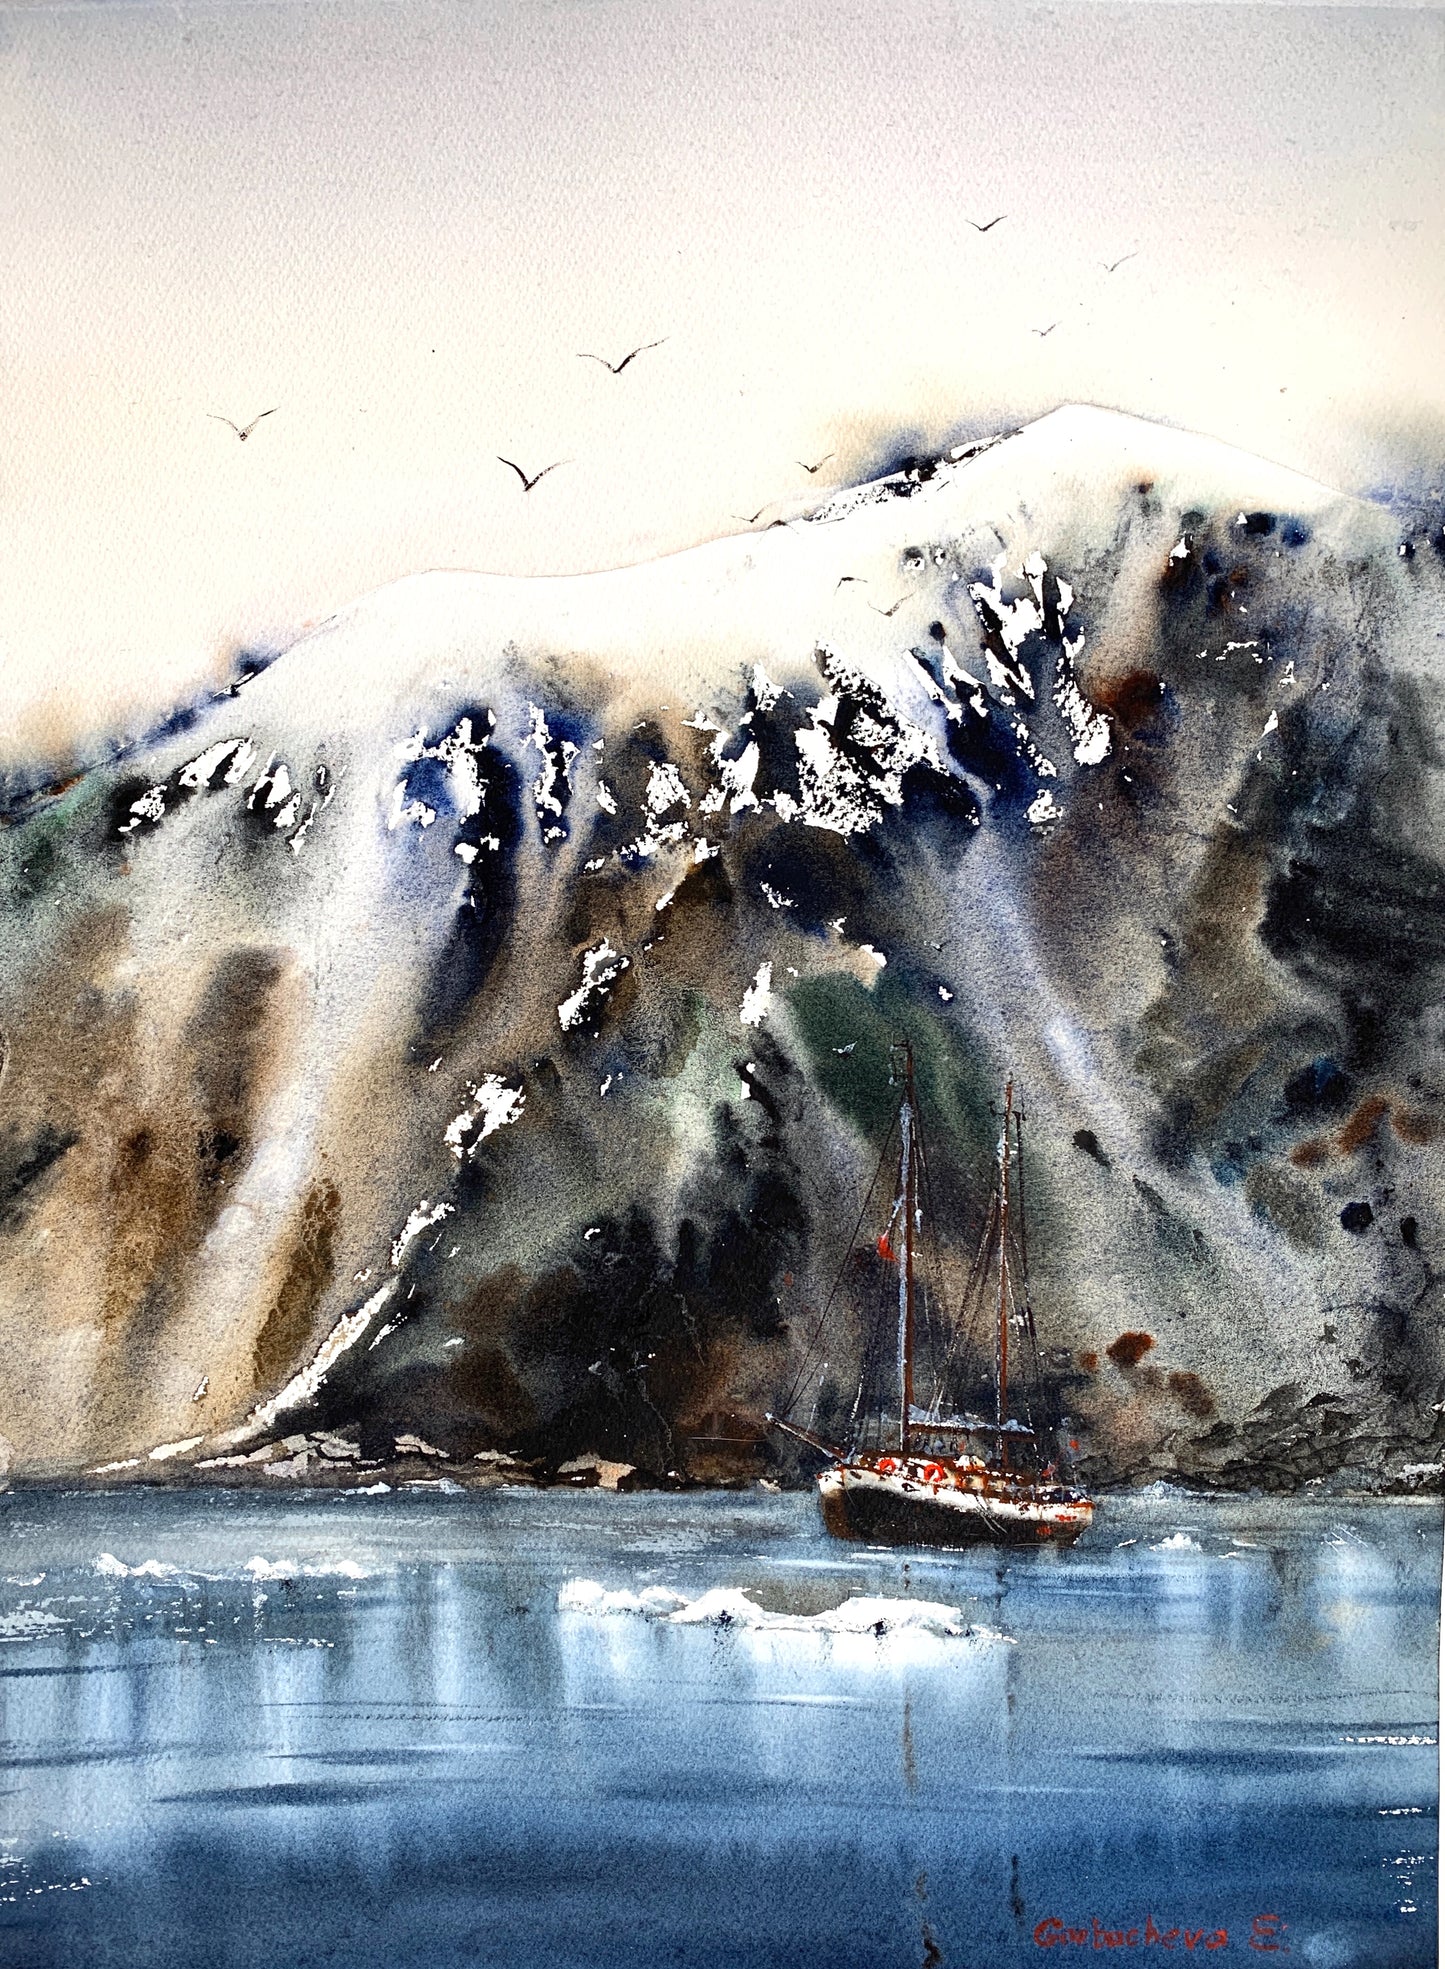 Watercolor Painting Original - Ship and fjords - 22x16 in